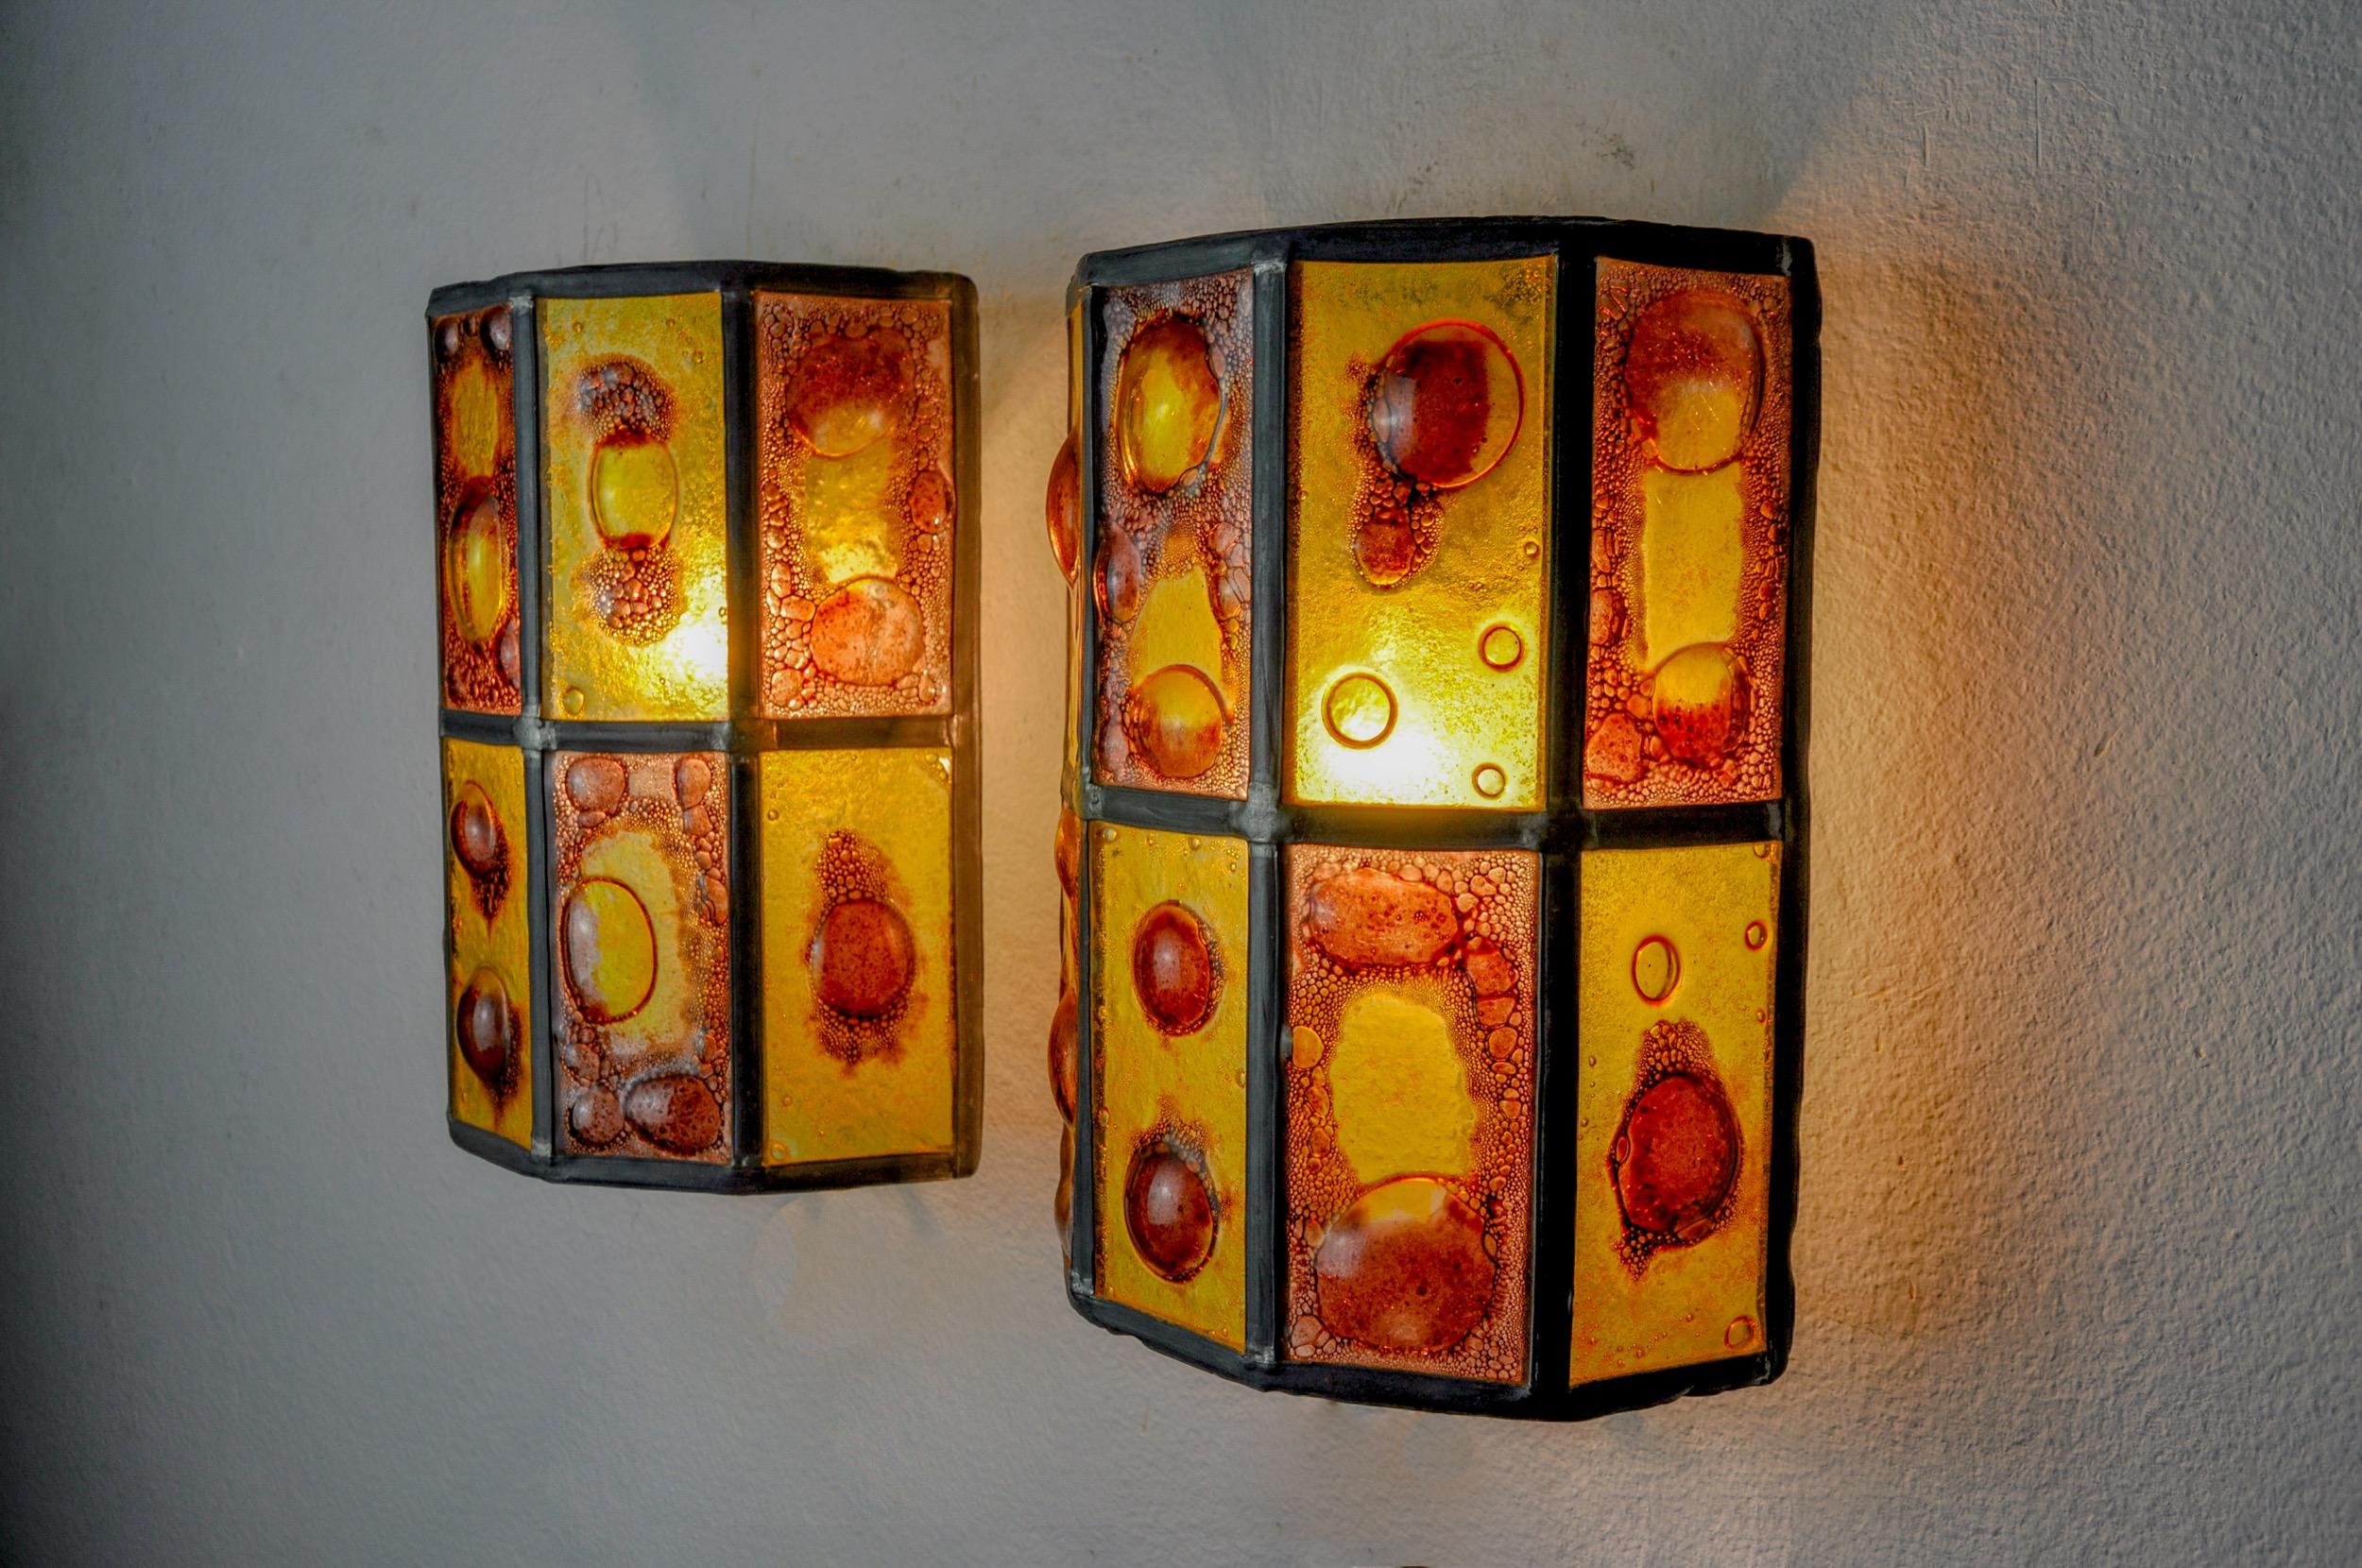 Superb and rare pair of brutalist sconces by Felipe Derflingher for feders, designed and produced in mexico in the 1960s. Superb glass work with air bubbles united by a lead structure. Unique wall lamps that will illuminate wonderfully and bring a